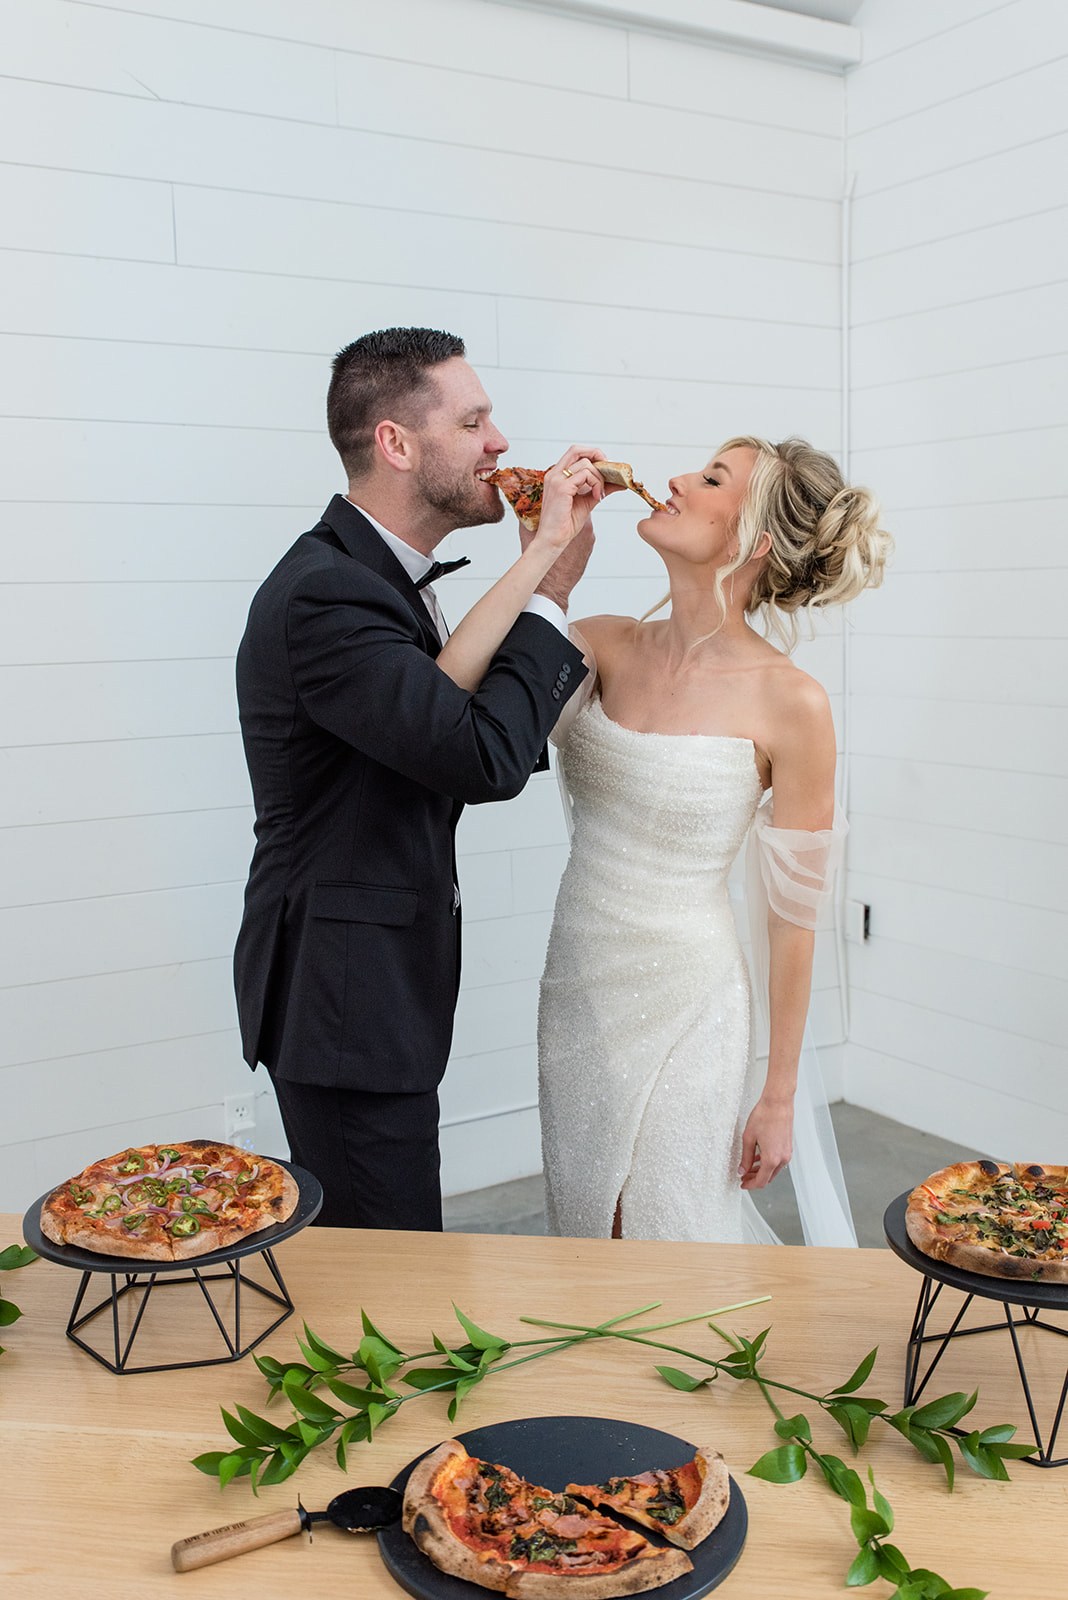 Bride and groom feed each other pizza at their wedding reception